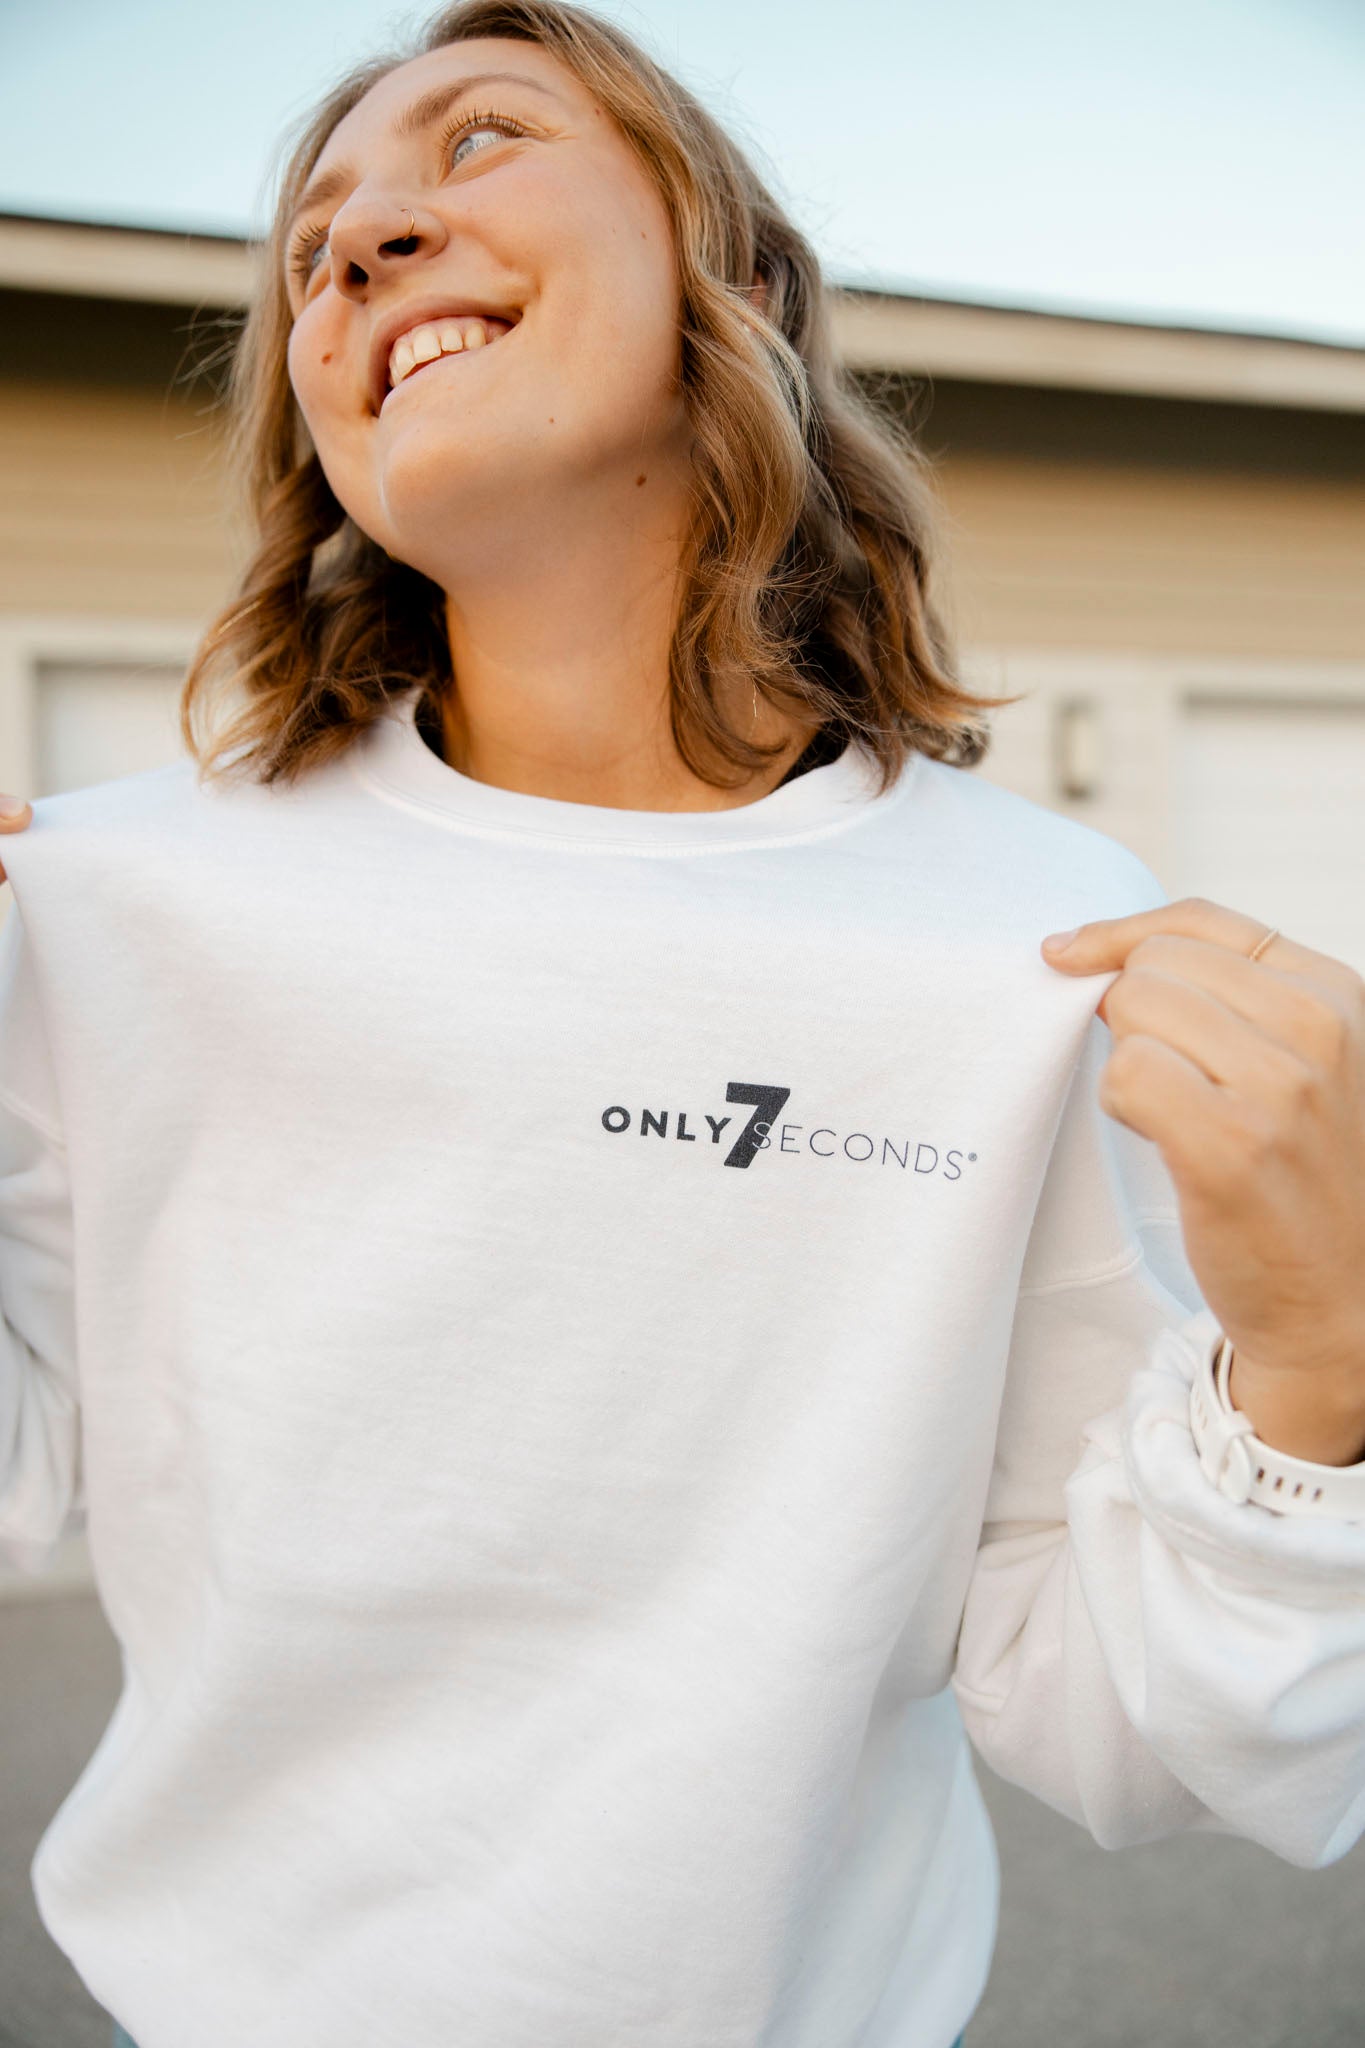 Not Alone In Your Story Crewneck - Only7Seconds Shop